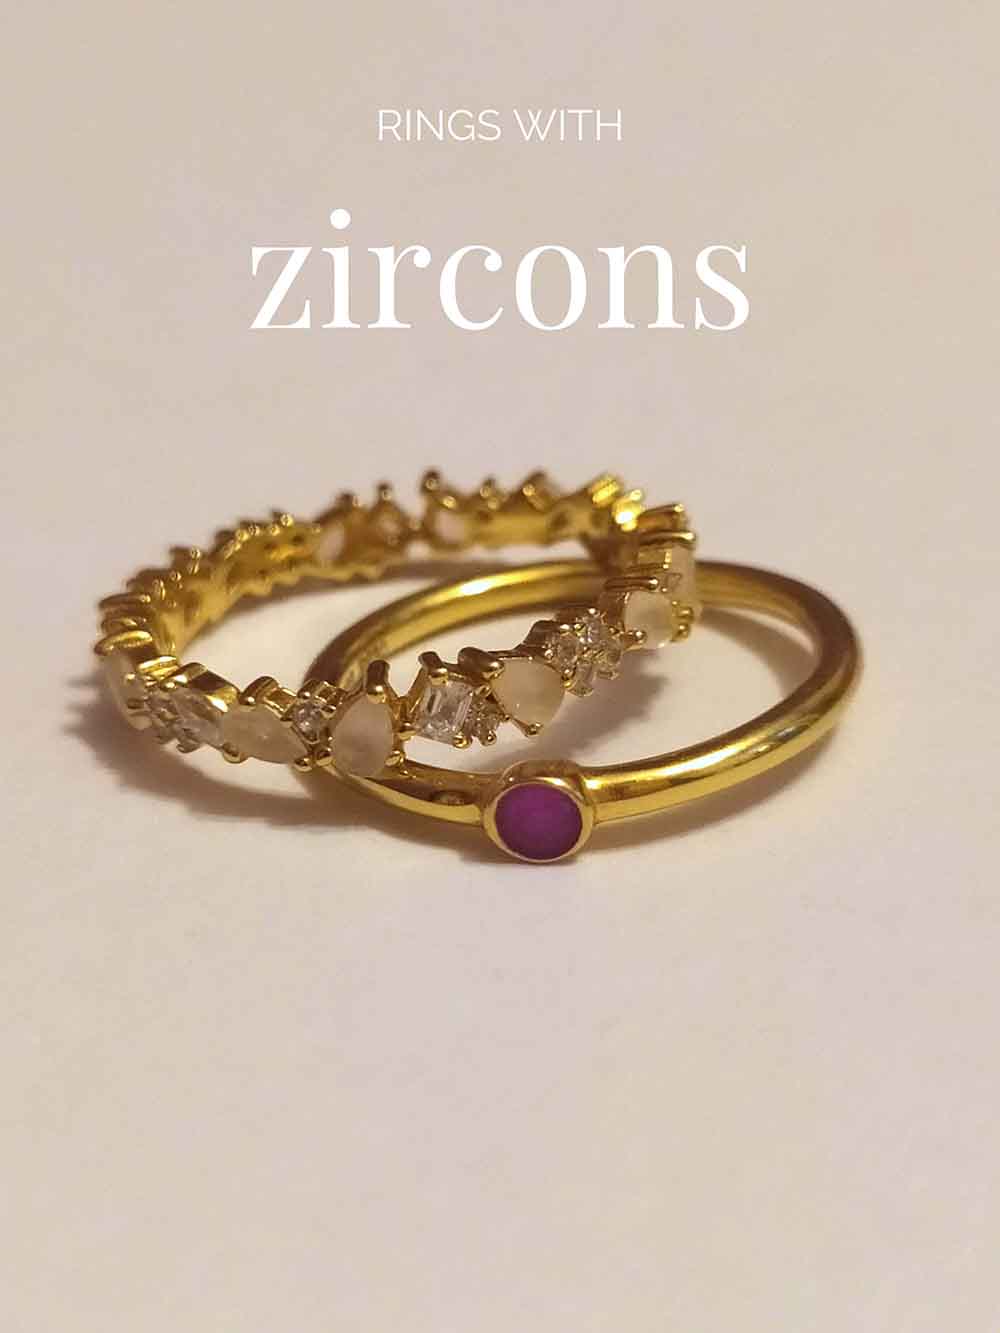 Rings with zircons. sterling silver jewelry.